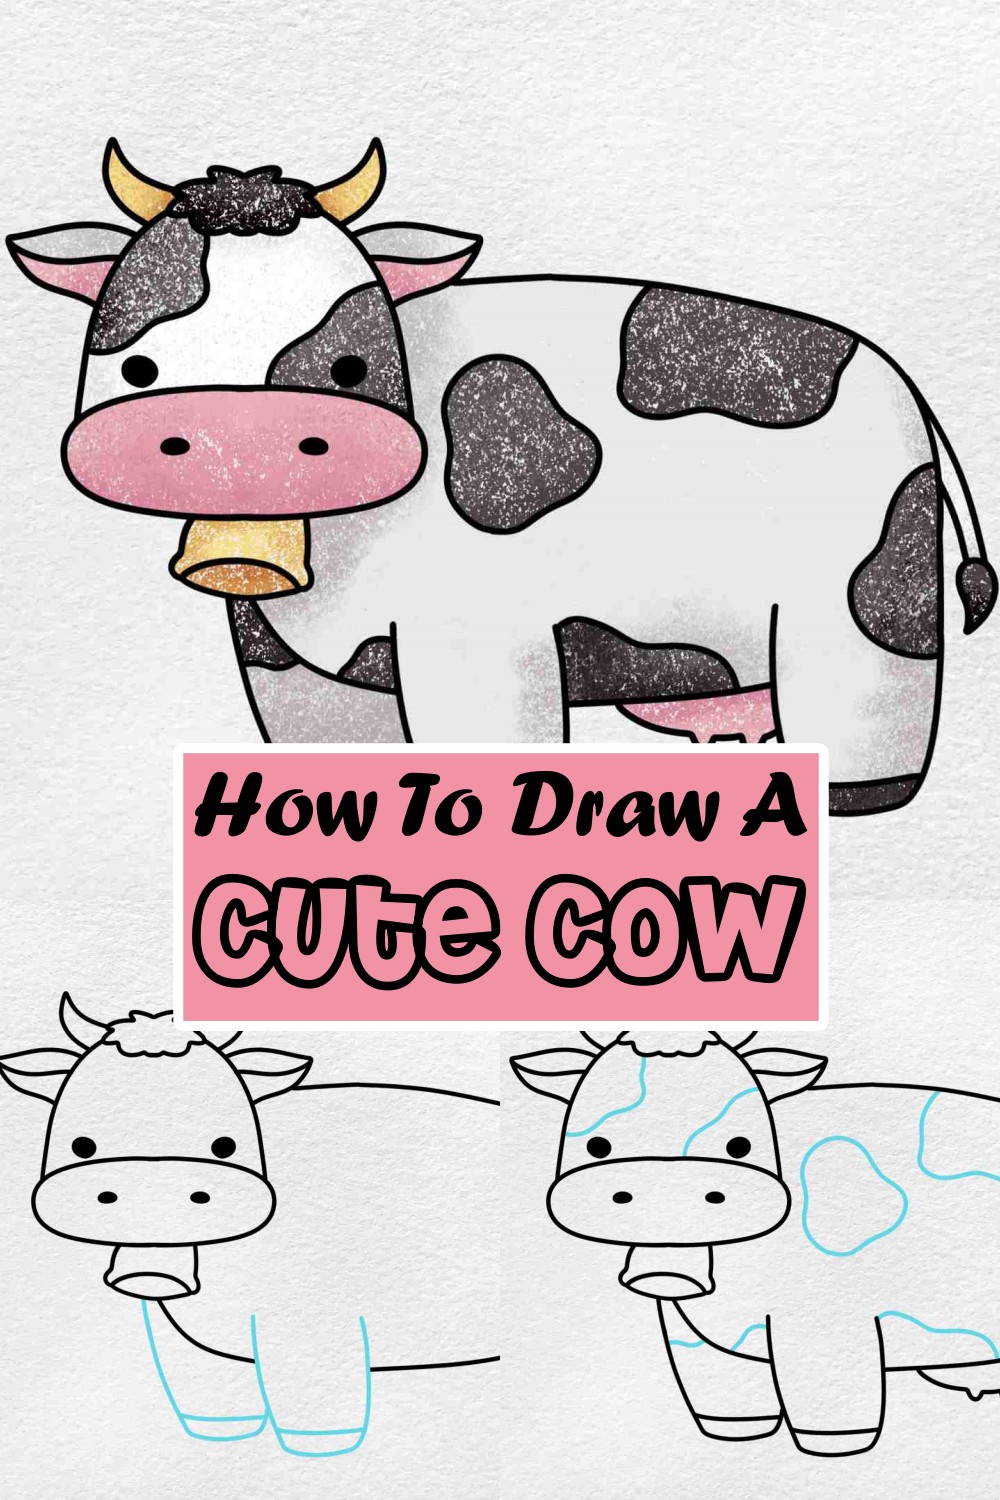 How To Draw A Cute Cow